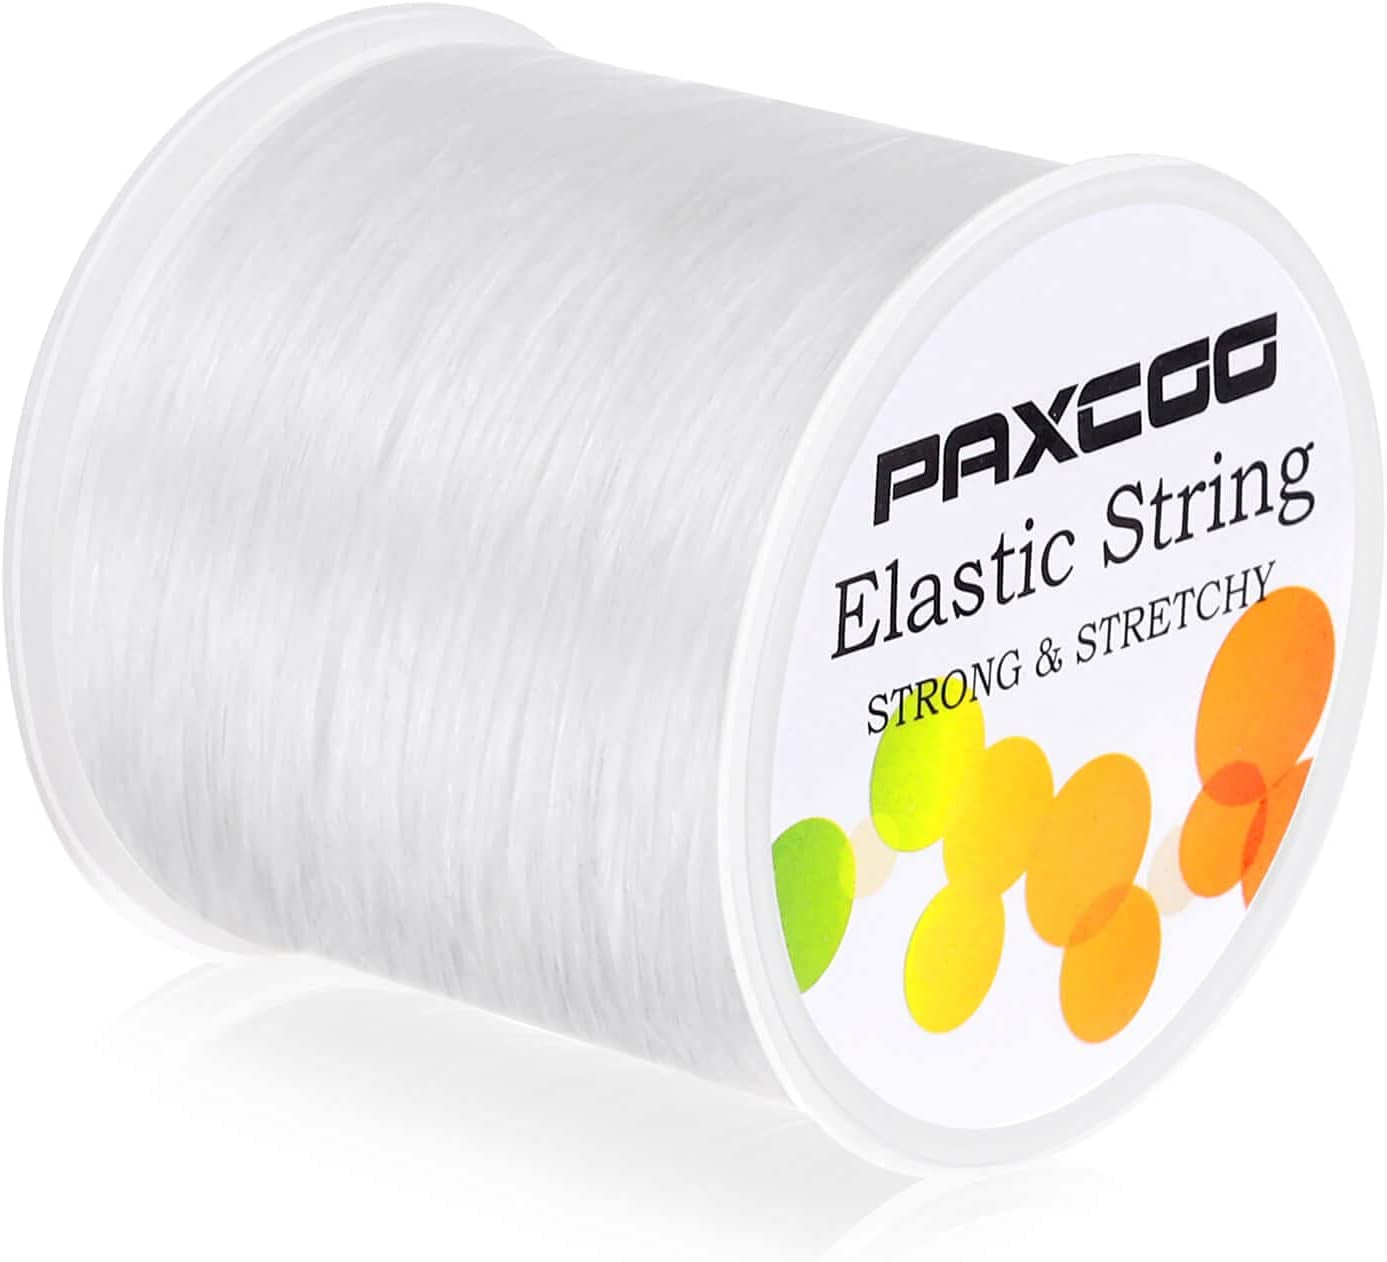 1Mm Elastic Bracelet String Cord Stretch Bead Cord for Jewelry Making and Bracelet Making White